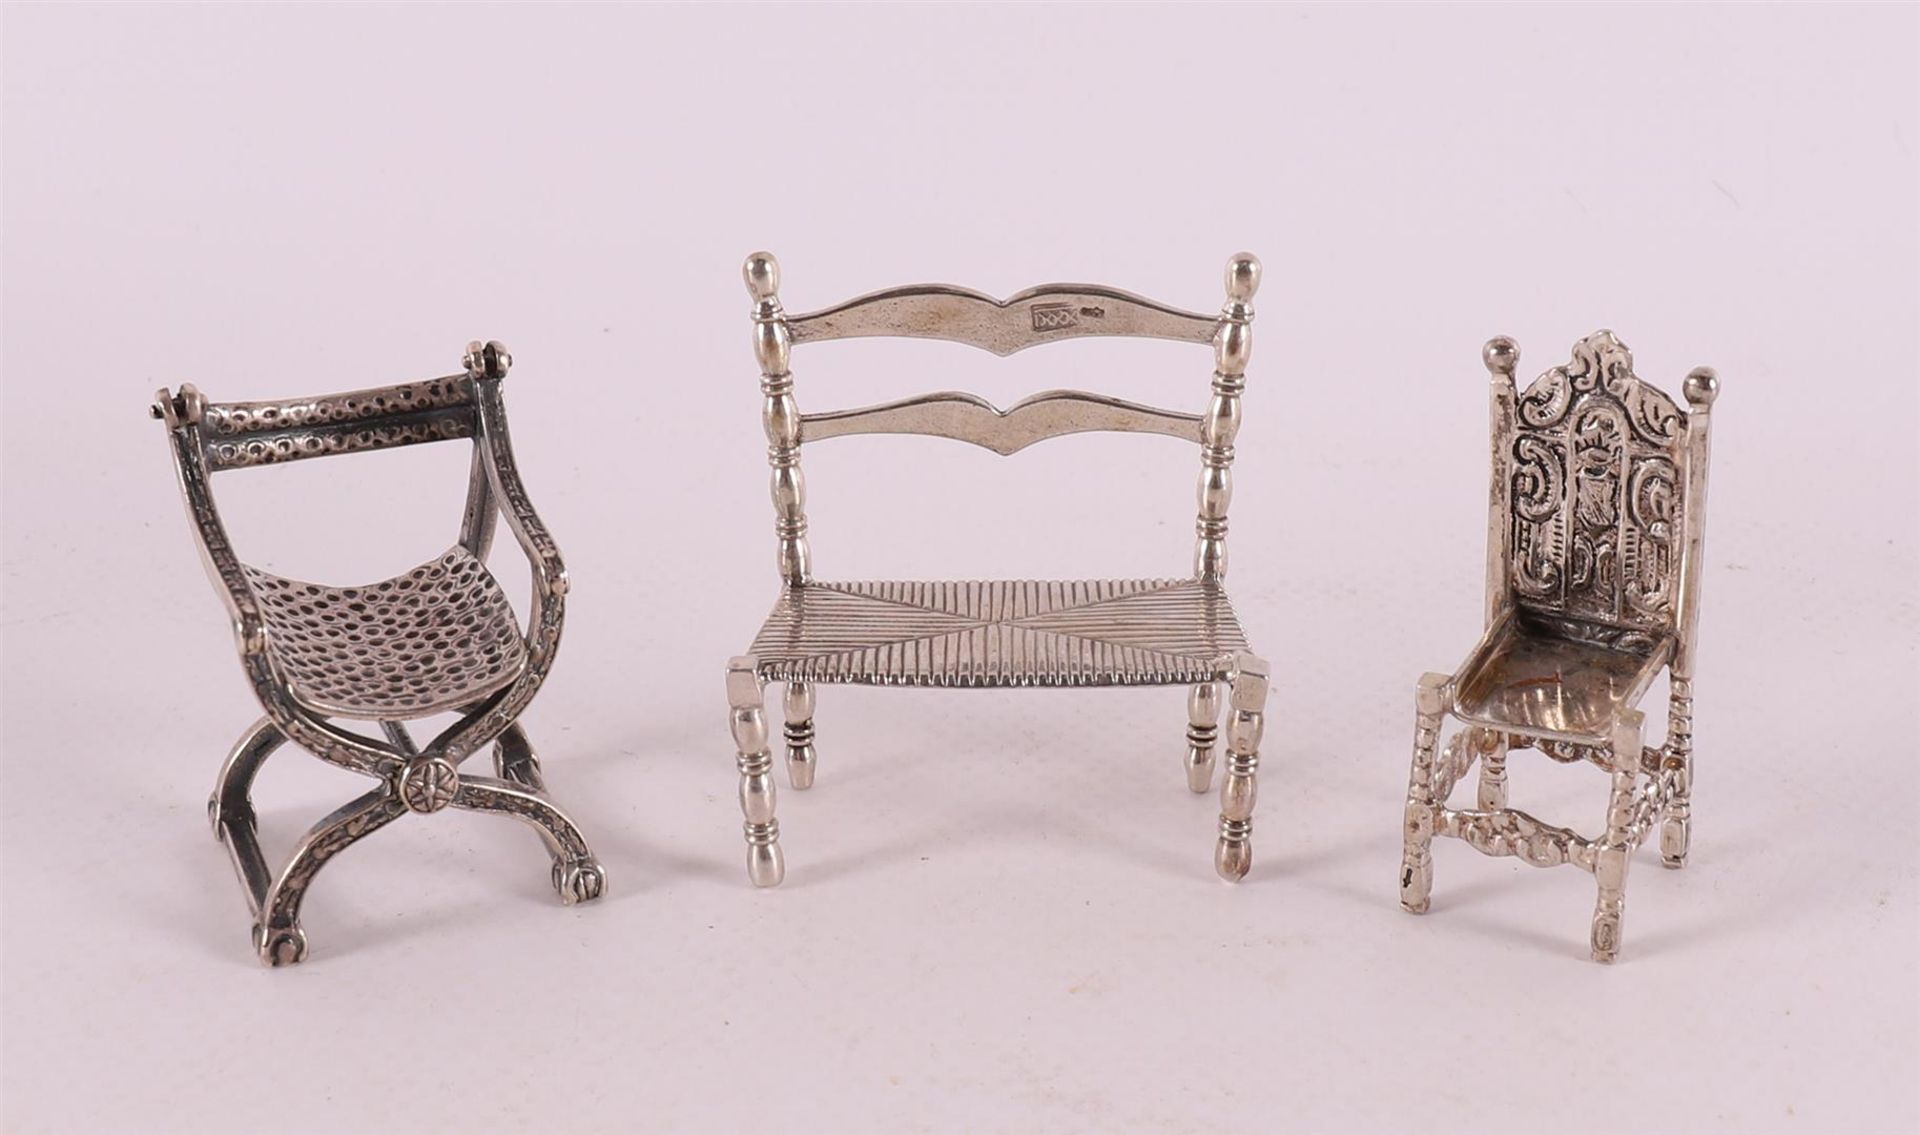 Etagere silver. A second grade silver bench, Amsterdam 20th century + 2 chairs.